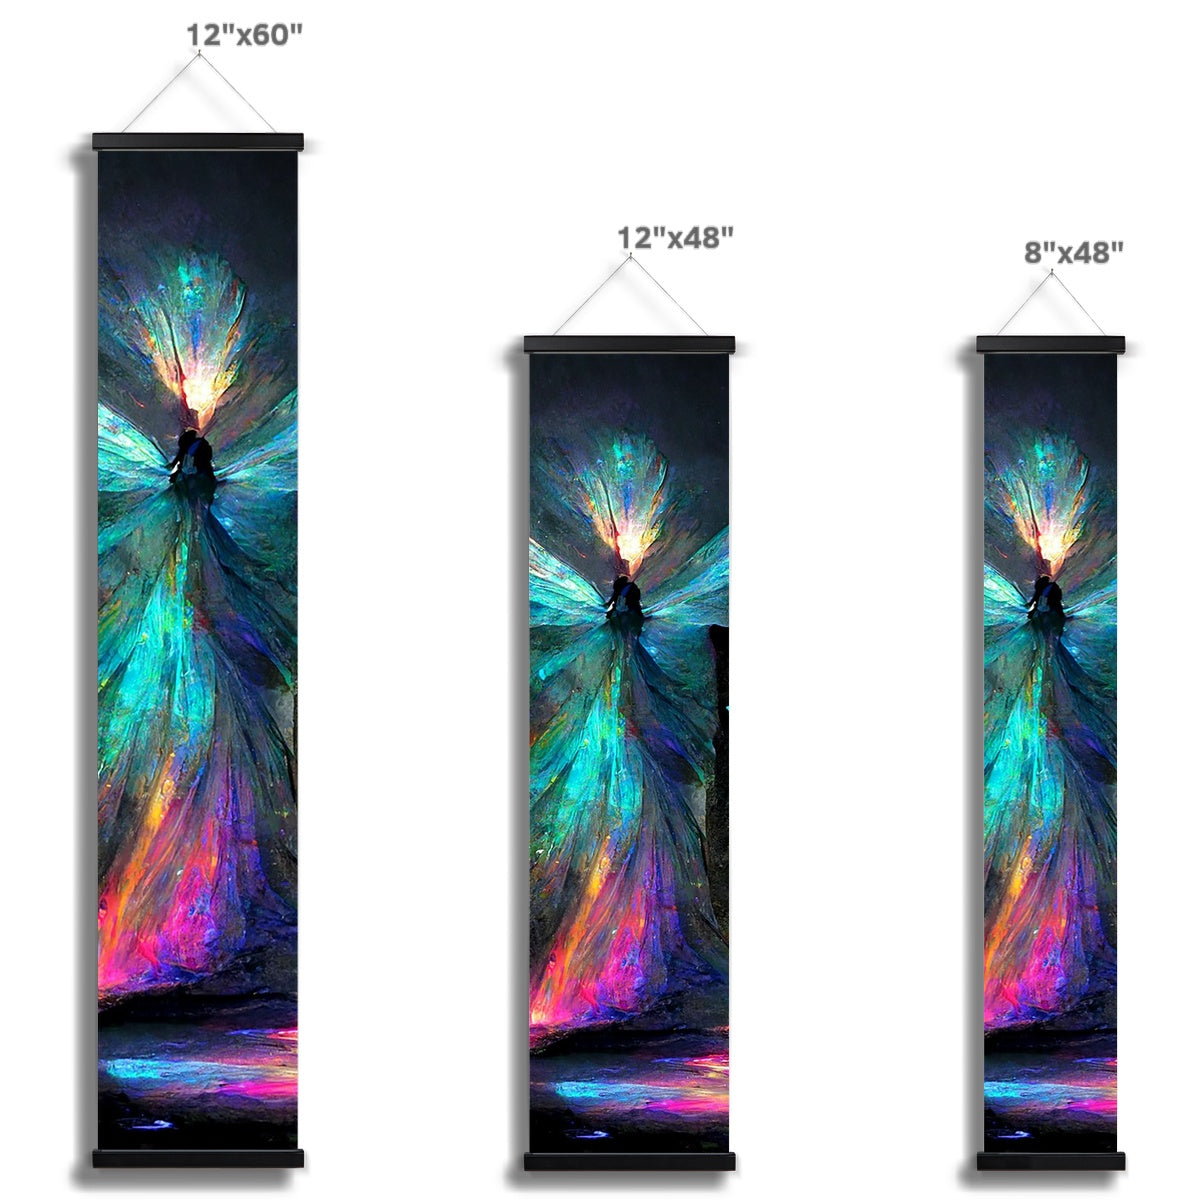 Iridescent energy fairy amongst ancient standing stones Wall Height Chart